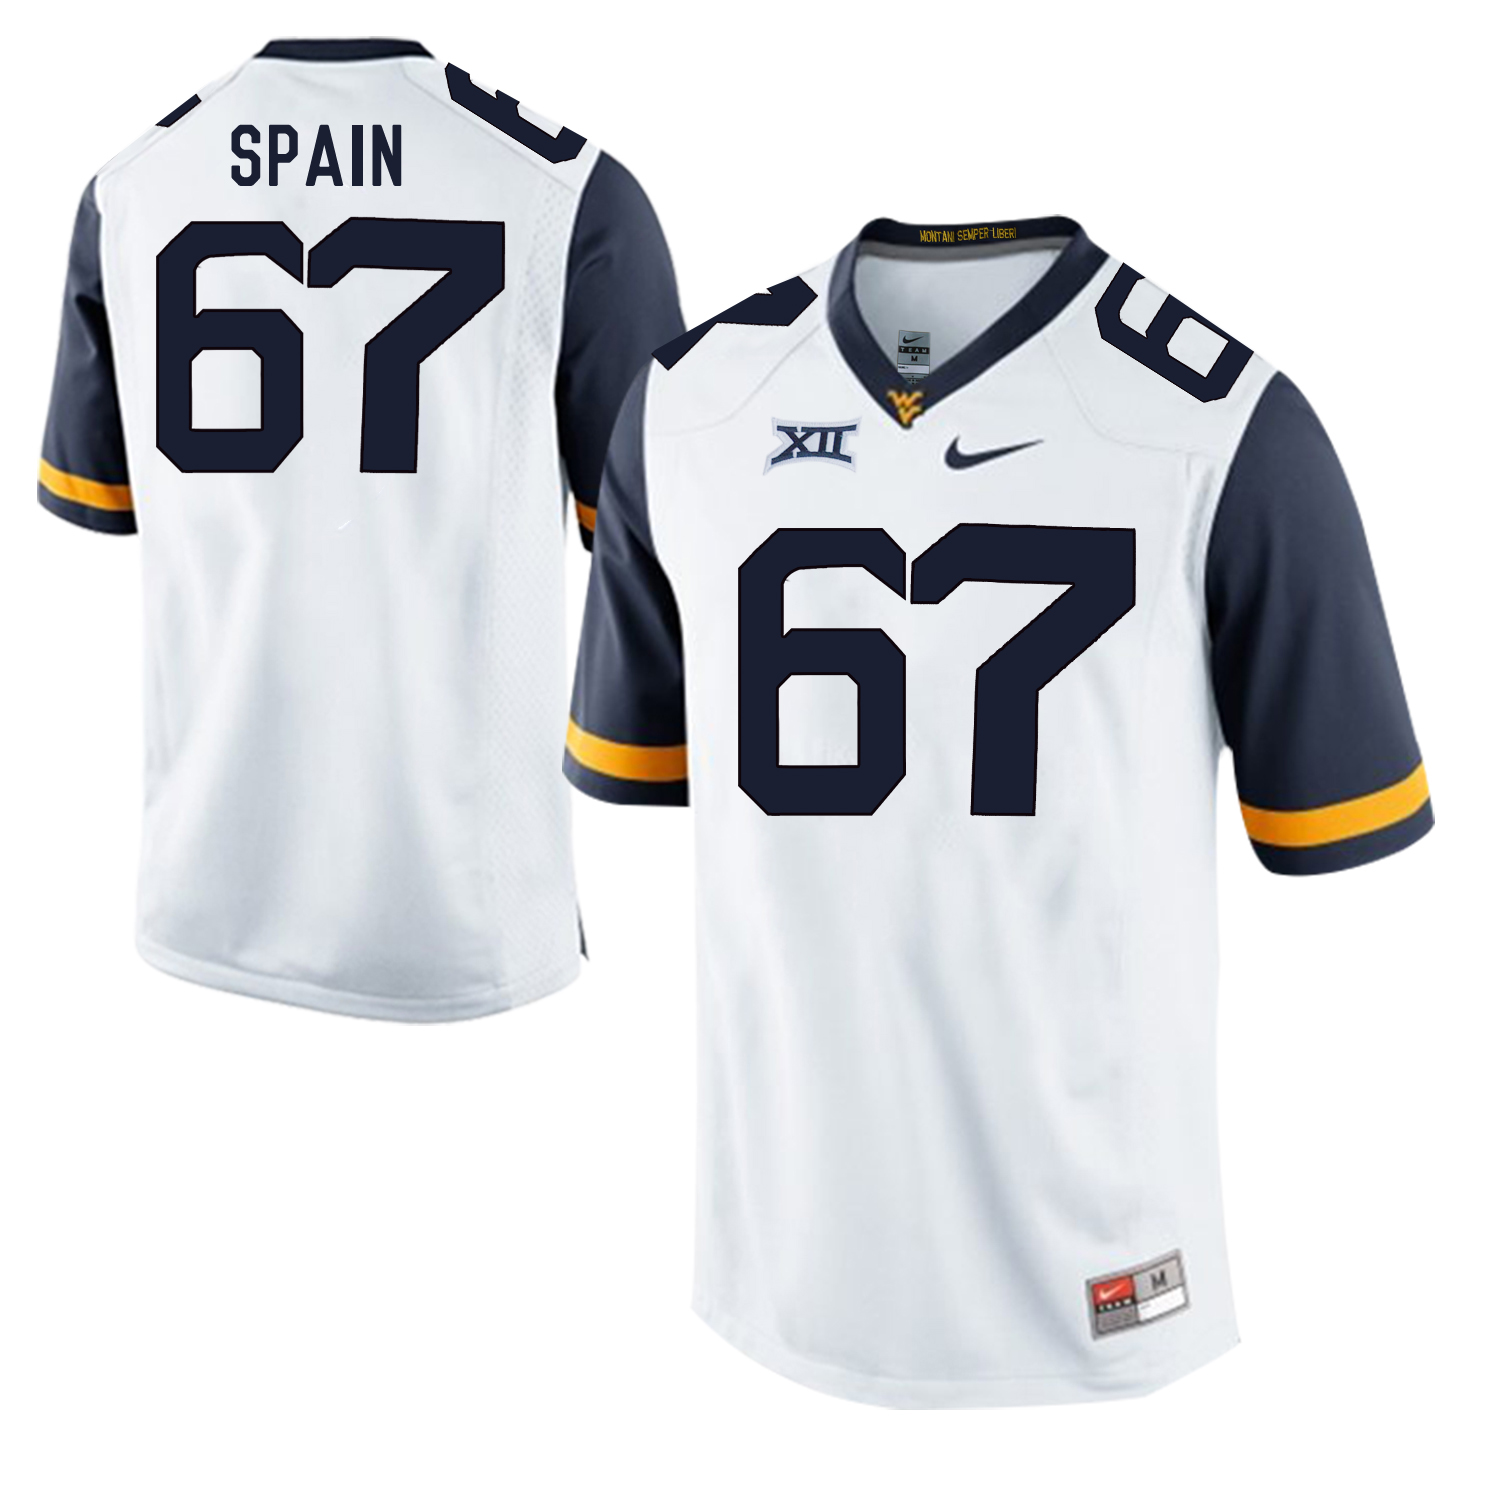 West Virginia Mountaineers 67 Quinton Spain White College Football Jersey